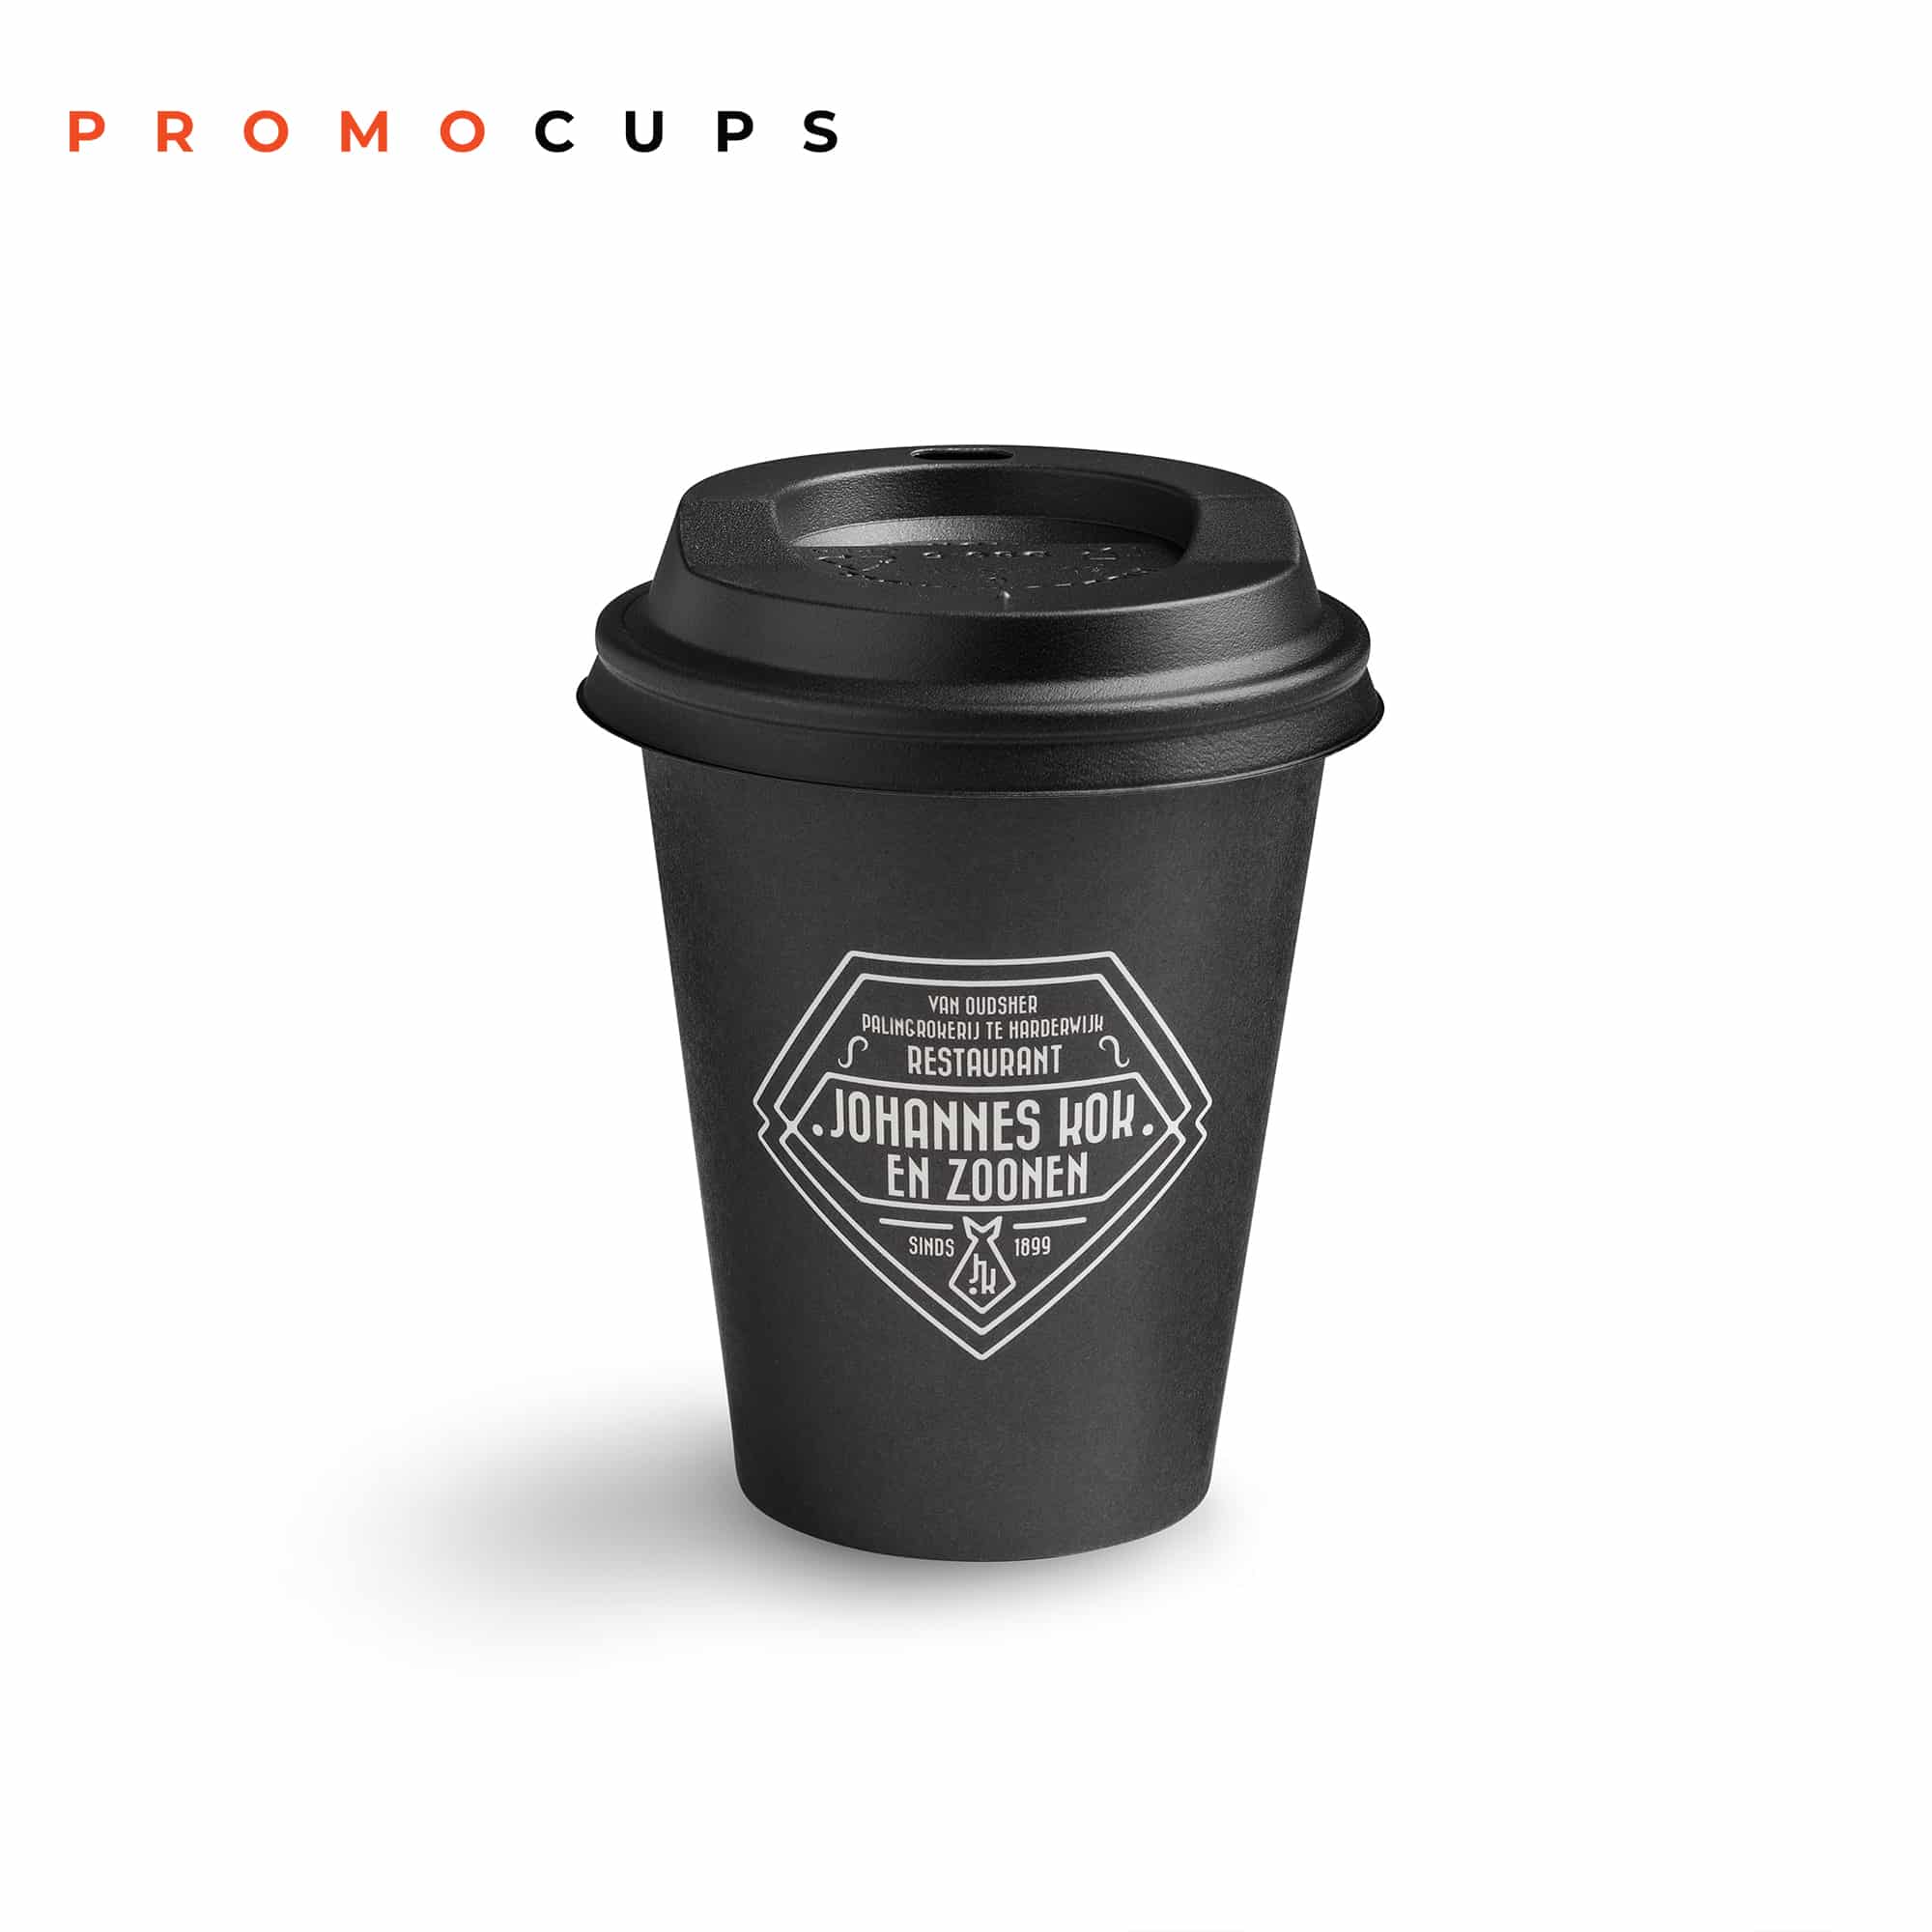 How to use personalized coffee cups to promote your business at trade shows and events